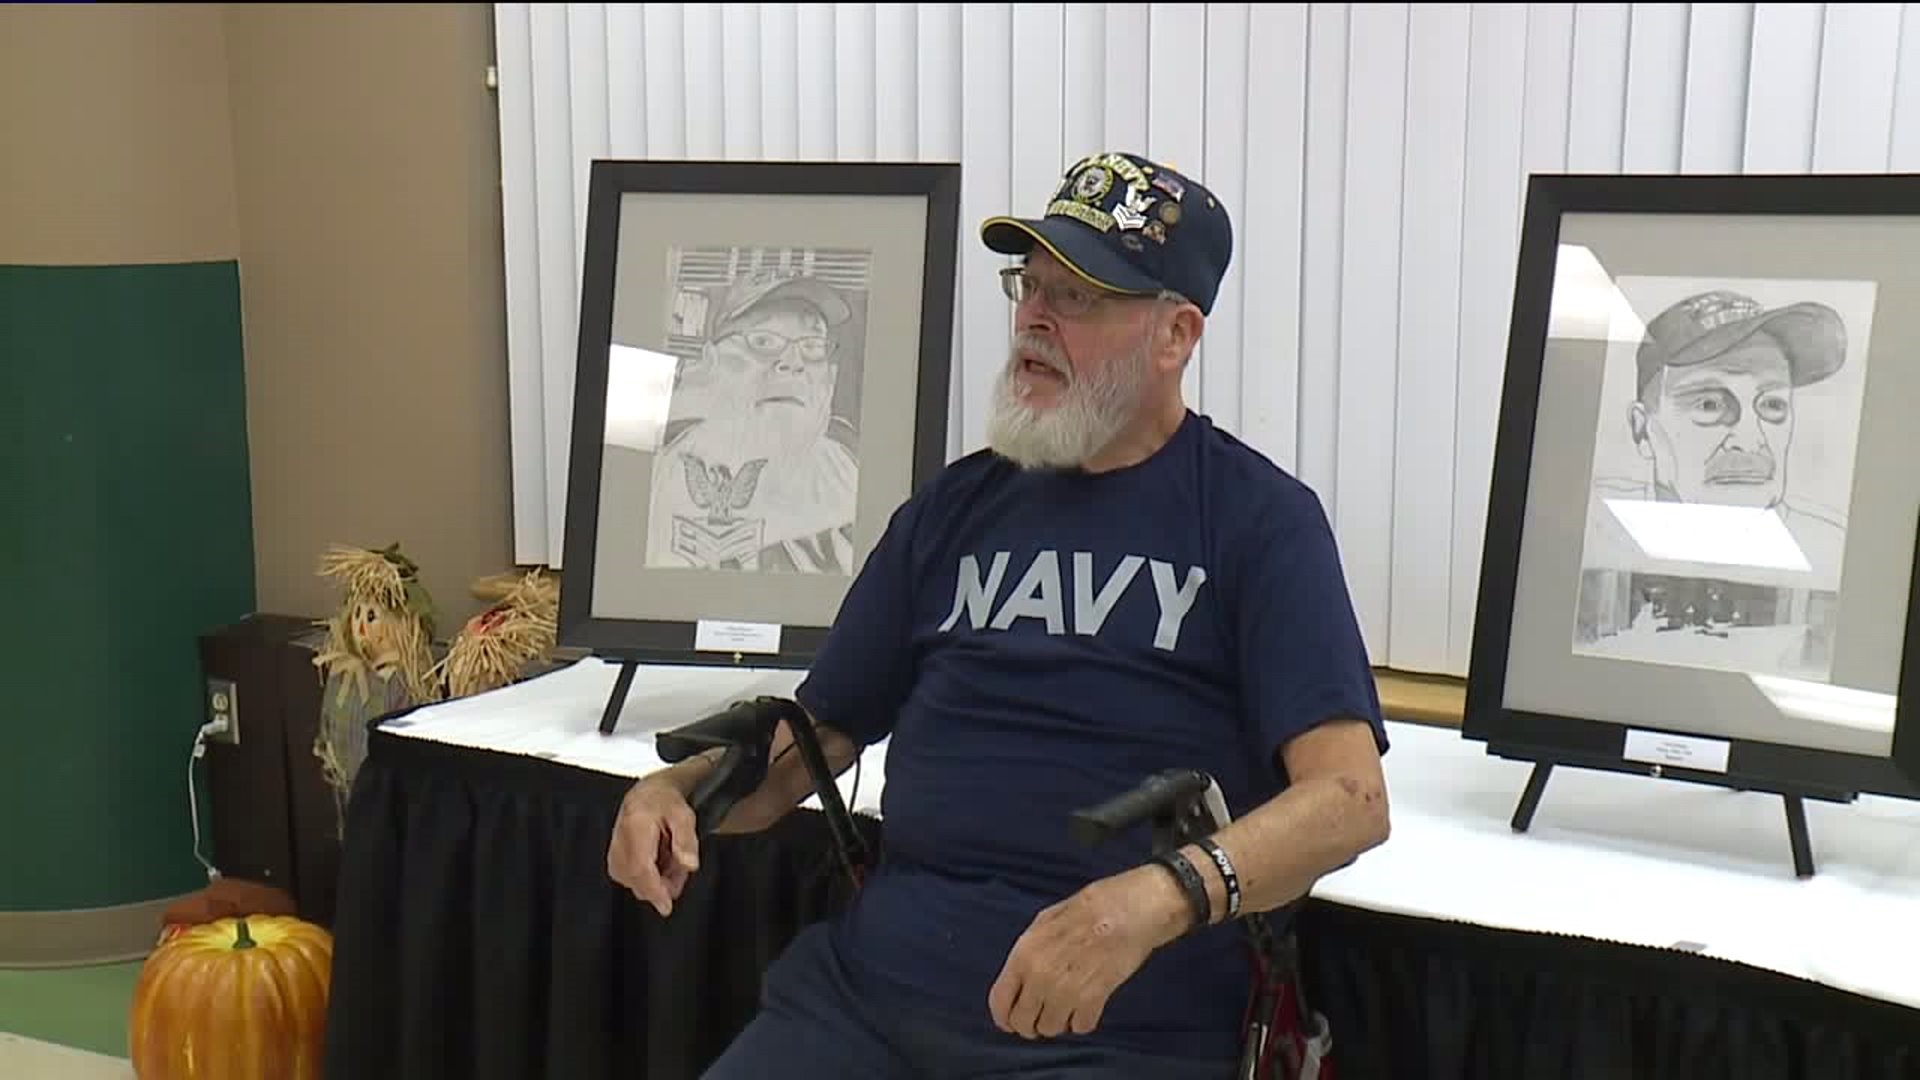 Portraits of Service: Students Honor Veterans with Artwork